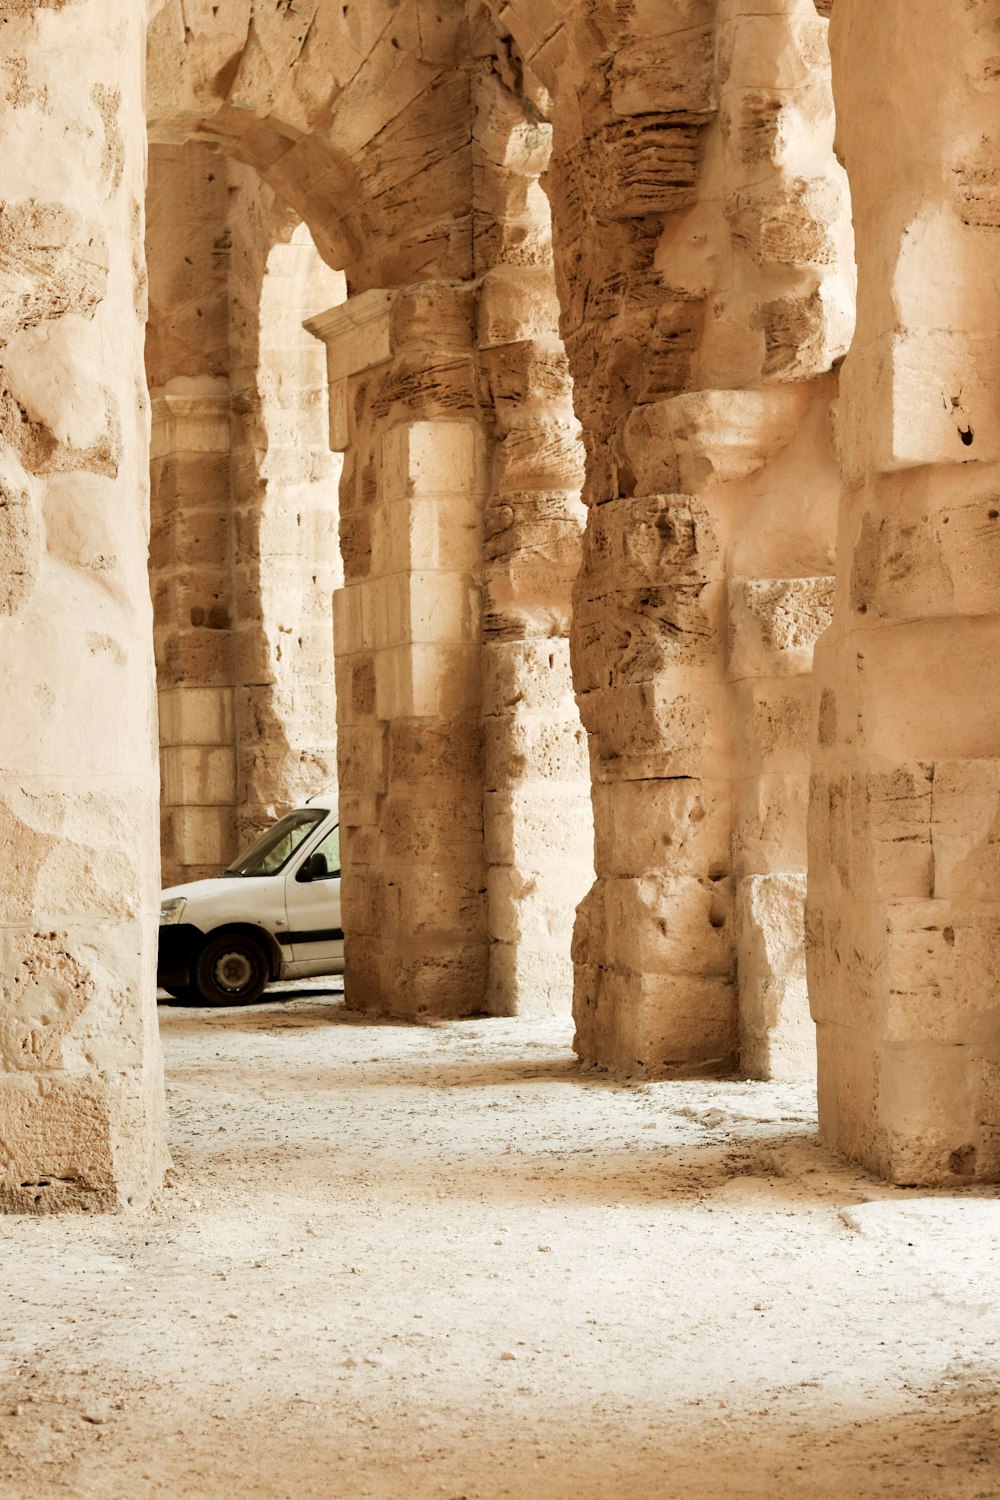 a car parked in a large stone building